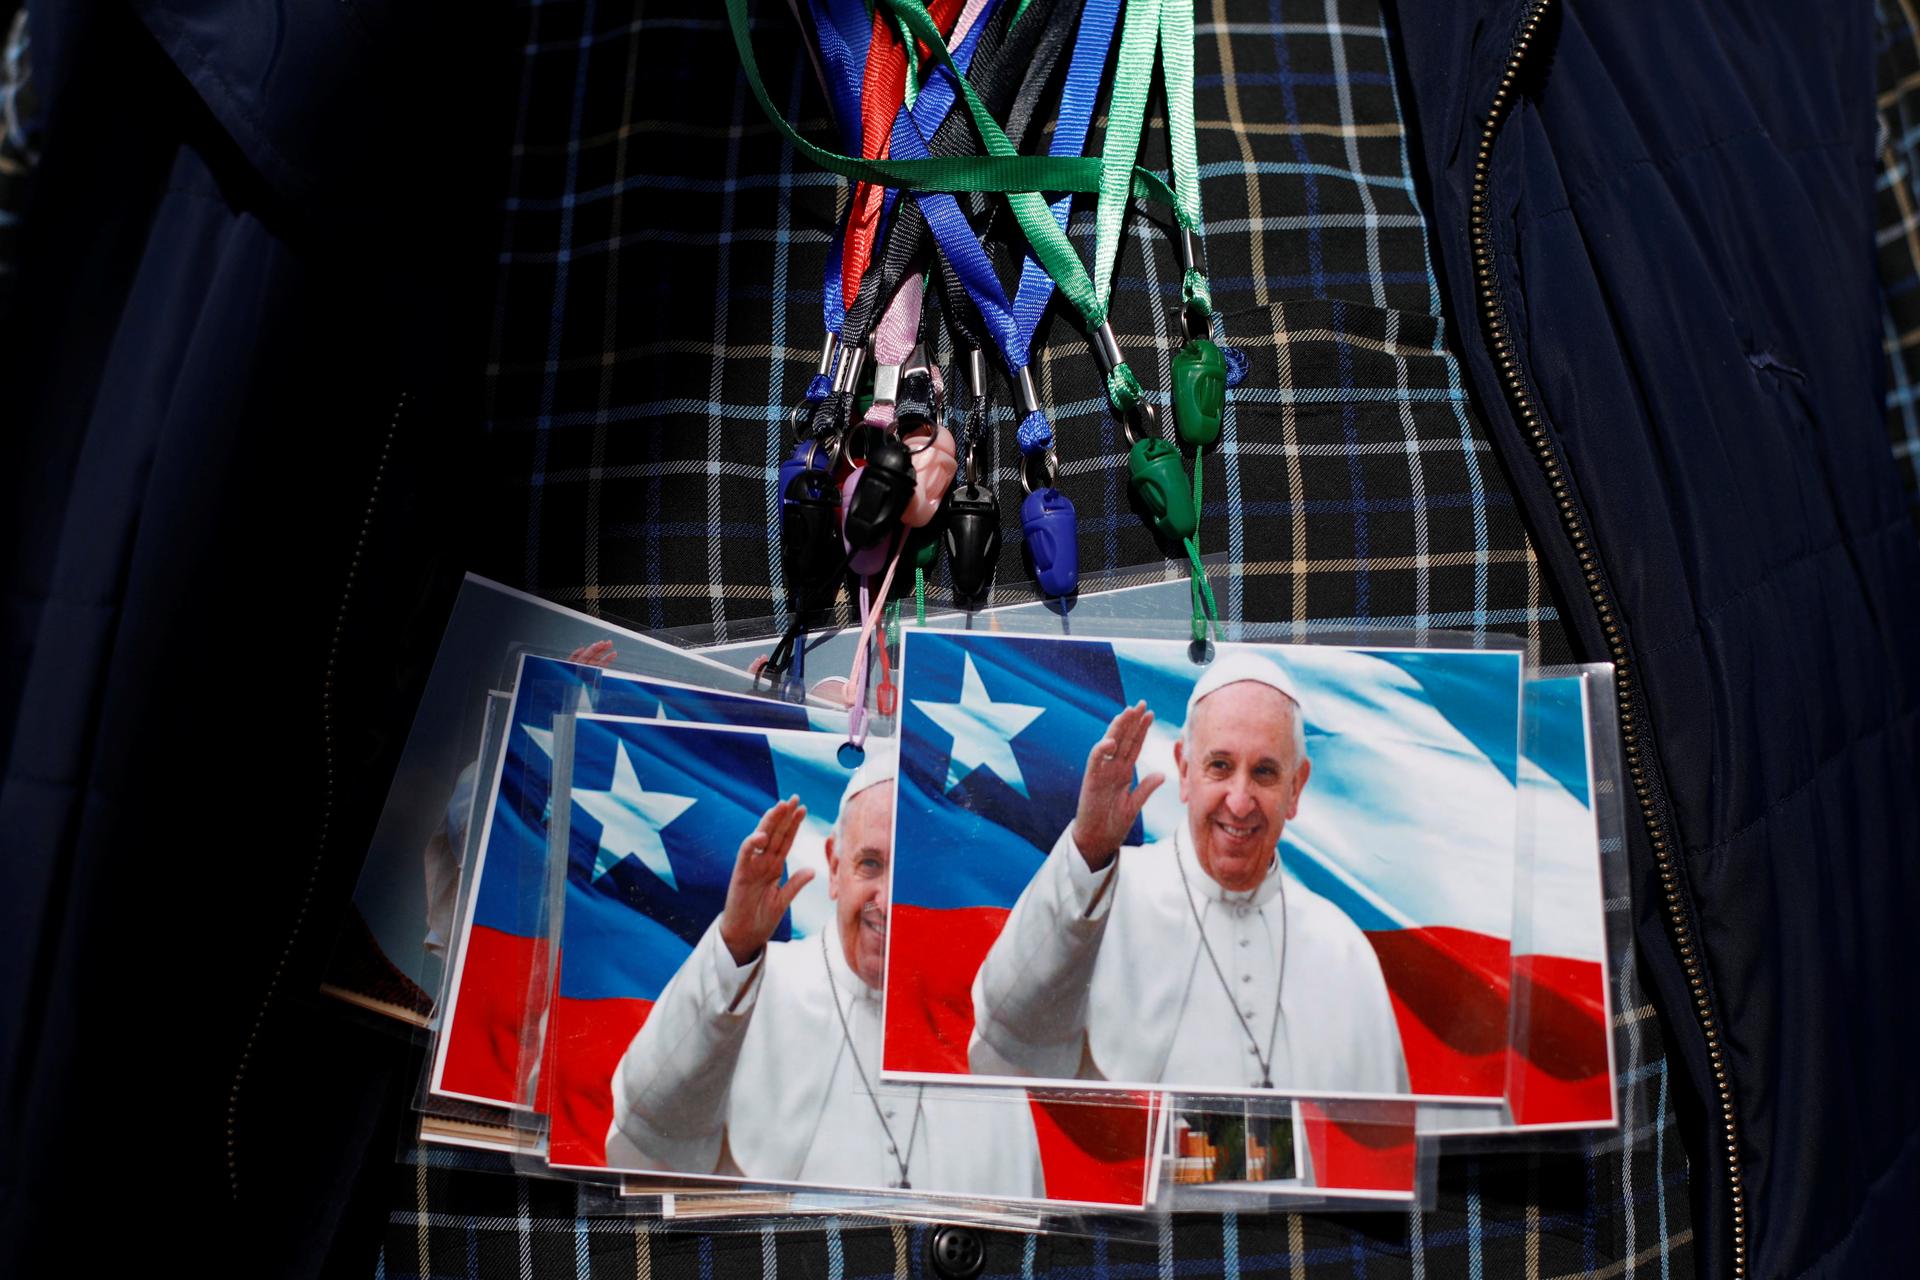 A man exhibits on his chest photos of Pope Francis to sell outside St. Jose Cathedral ahead of the papal visit in Temuco, Chile, Jan. 14, 2018.